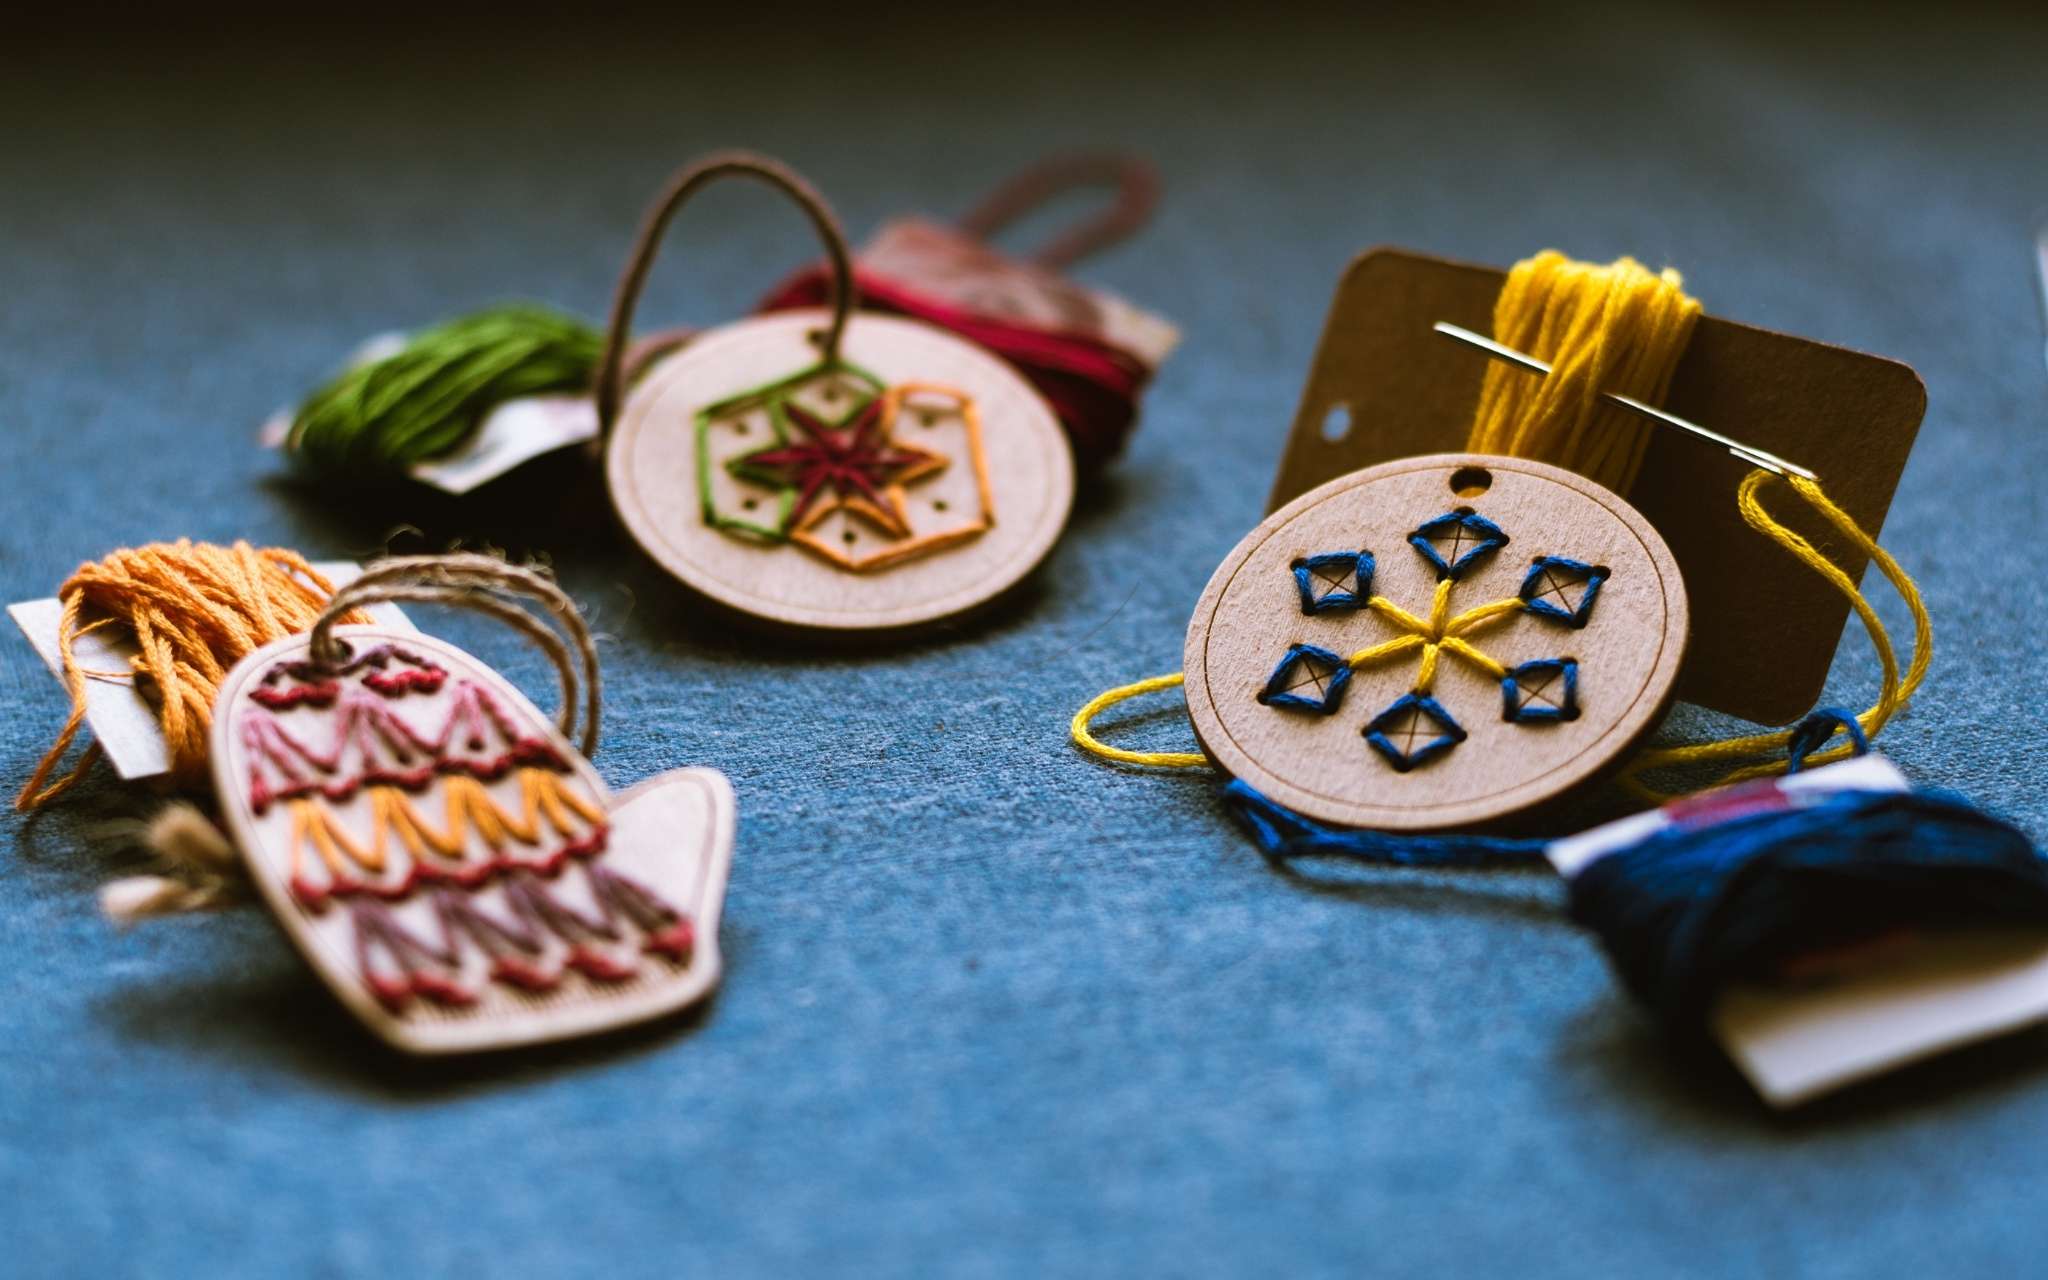 Wooden hanging ornaments shaped as mittens, a circle and a snowflake have been hand stitched through holes in the wood with brightly coloured threads.